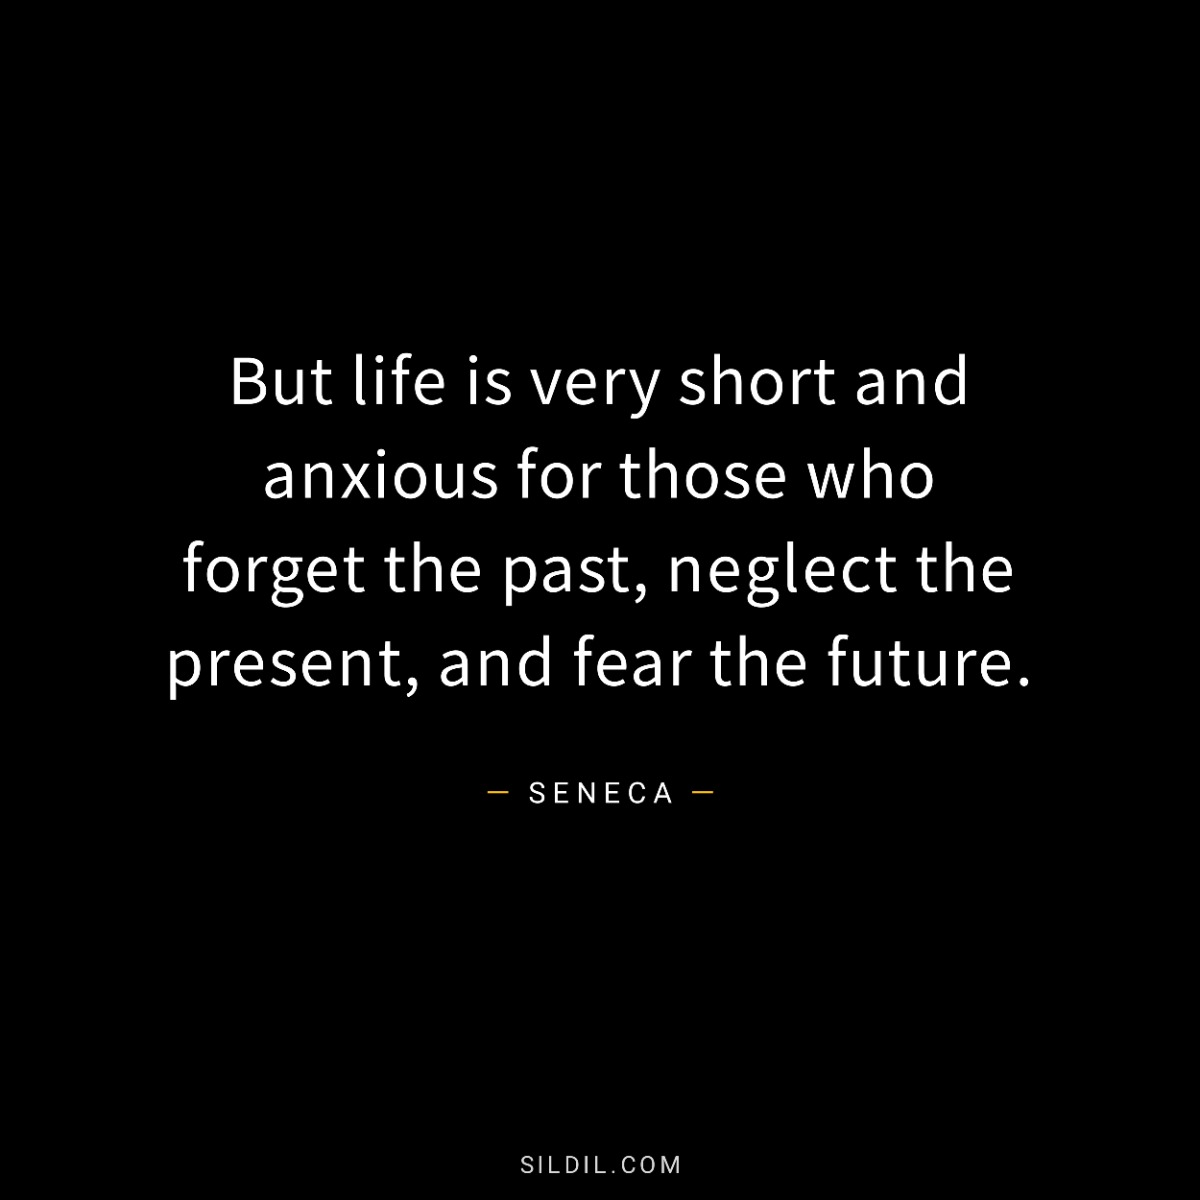 But life is very short and anxious for those who forget the past, neglect the present, and fear the future.